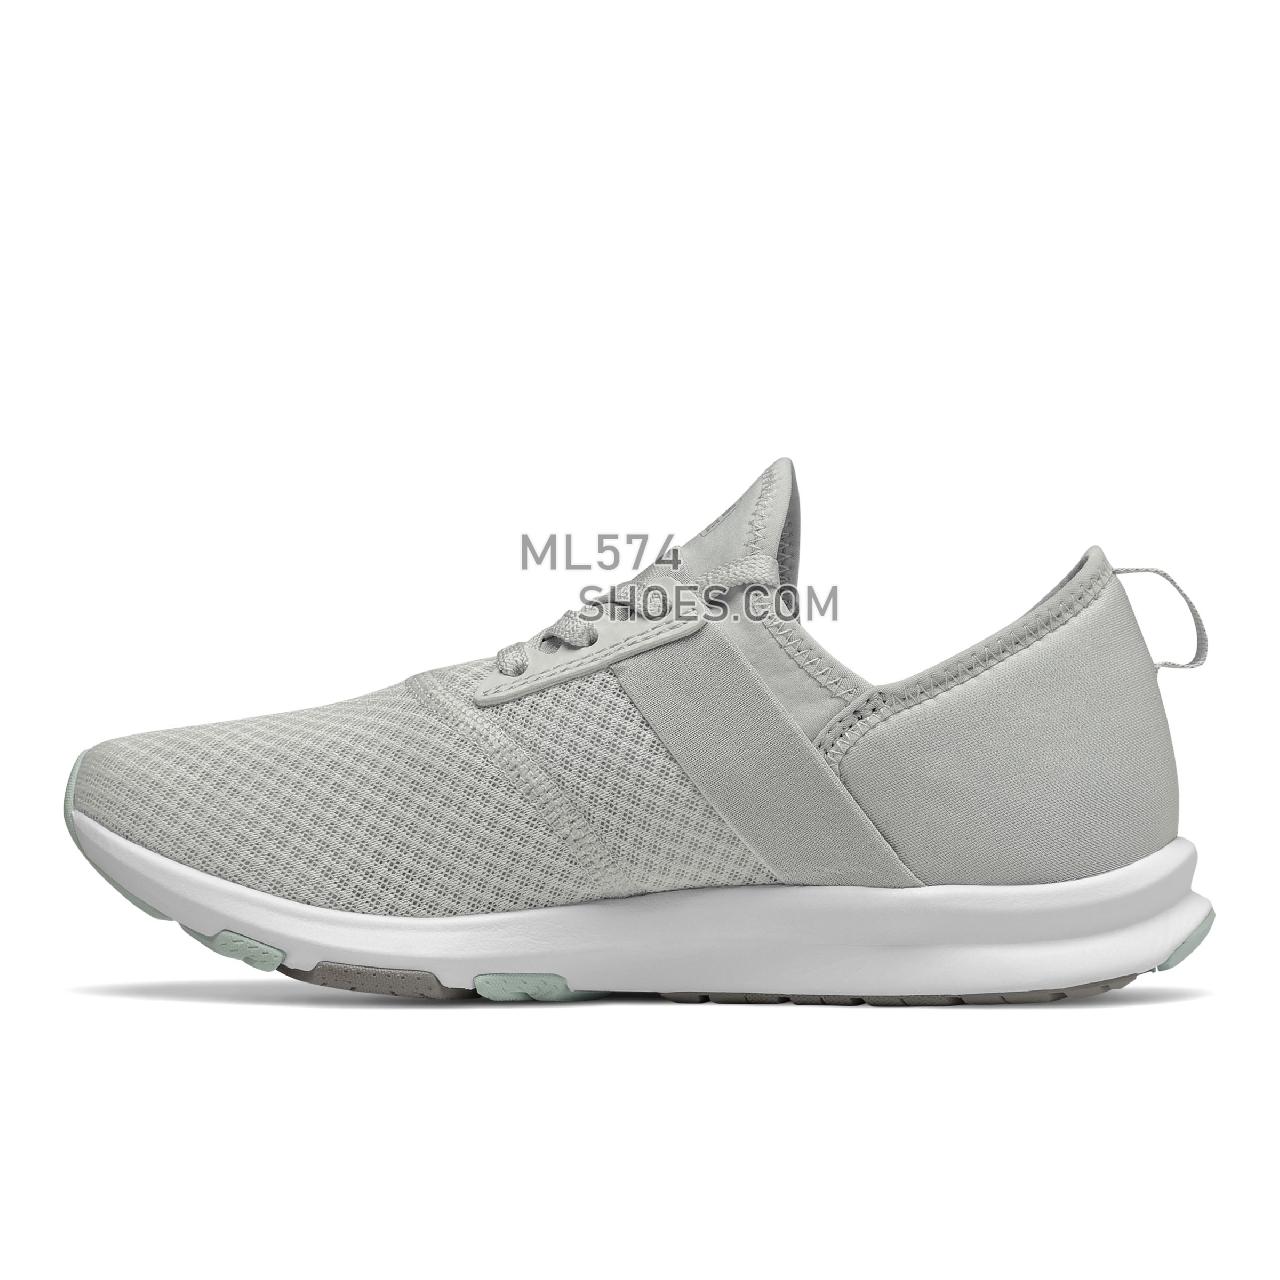 New Balance FuelCore Nergize - Women's Sport Style Sneakers - Summer Fog with Mint Chalk and White - WXNRGSM1